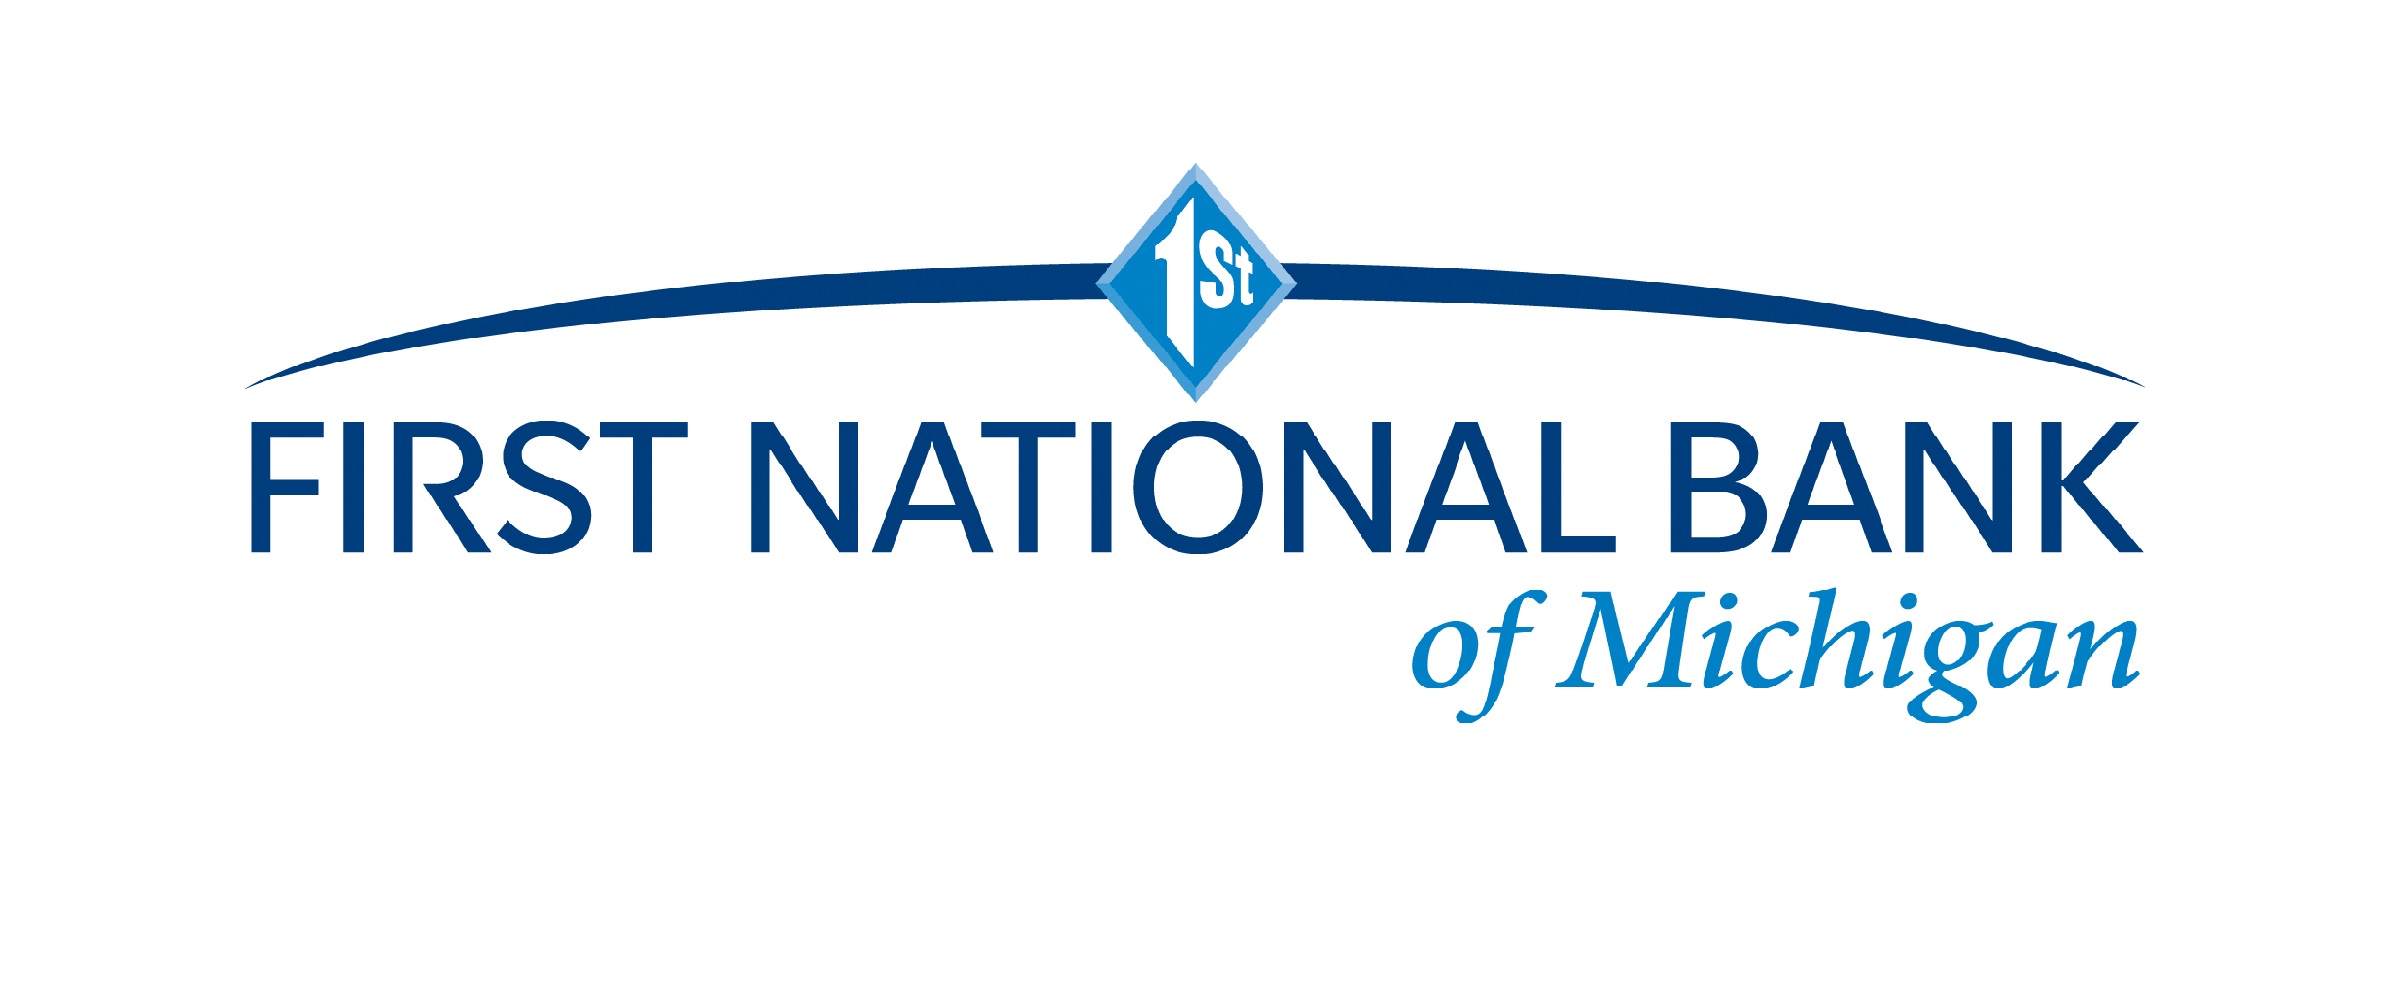 First National Bank of Michigan